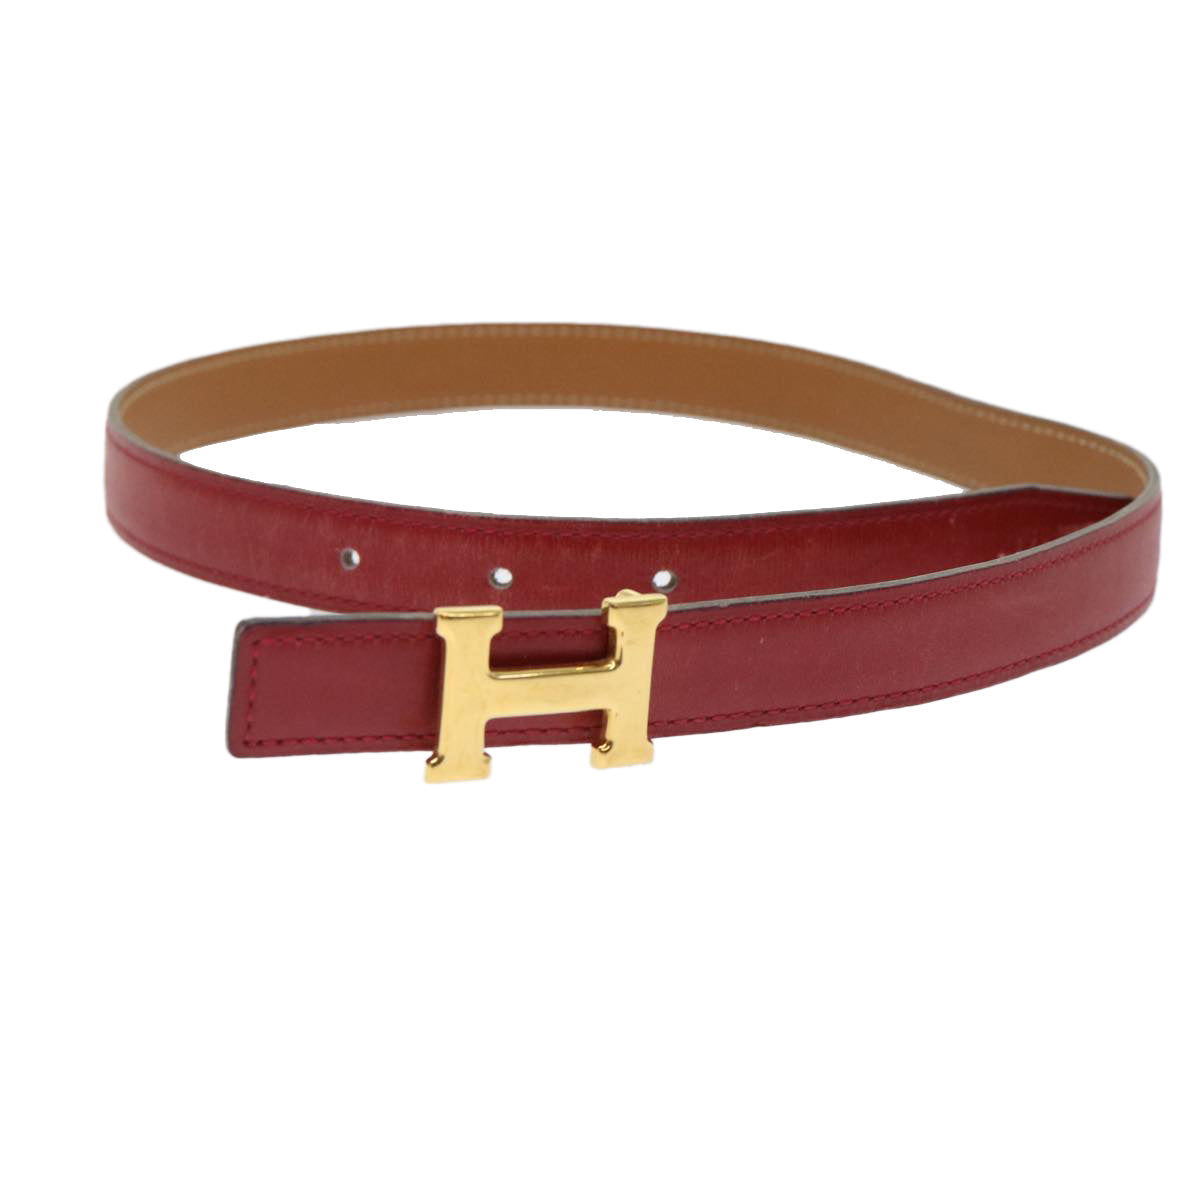 HERMES Belt Leather 29.1"" Red Auth am4718